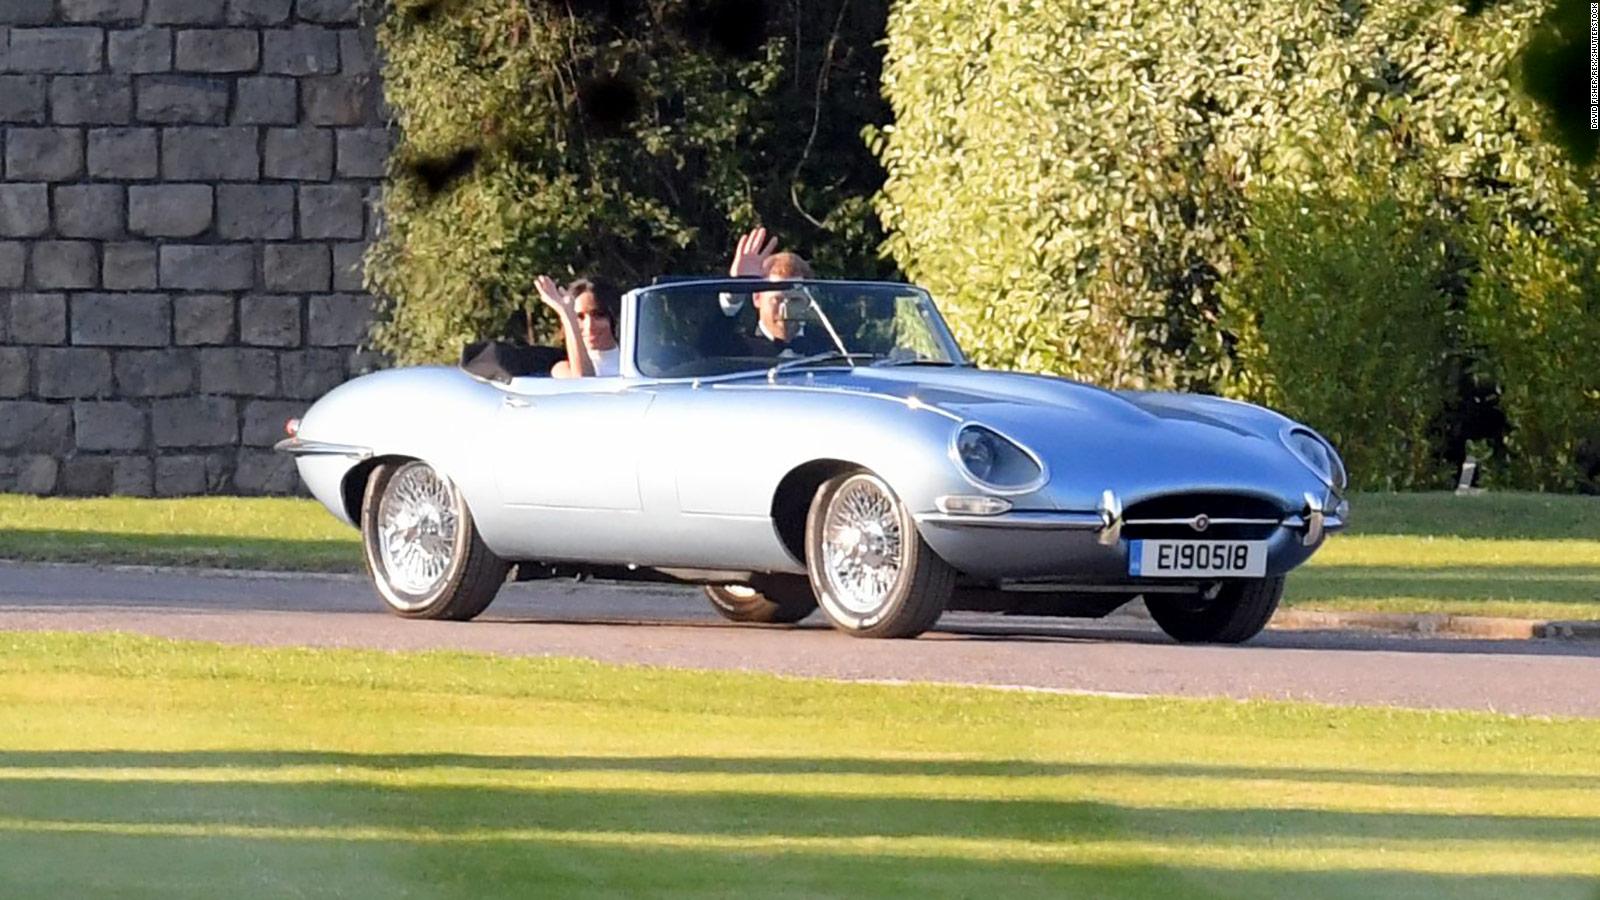 Jaguar E Type Royal Newly Weds Stun Crowds With Electrifying